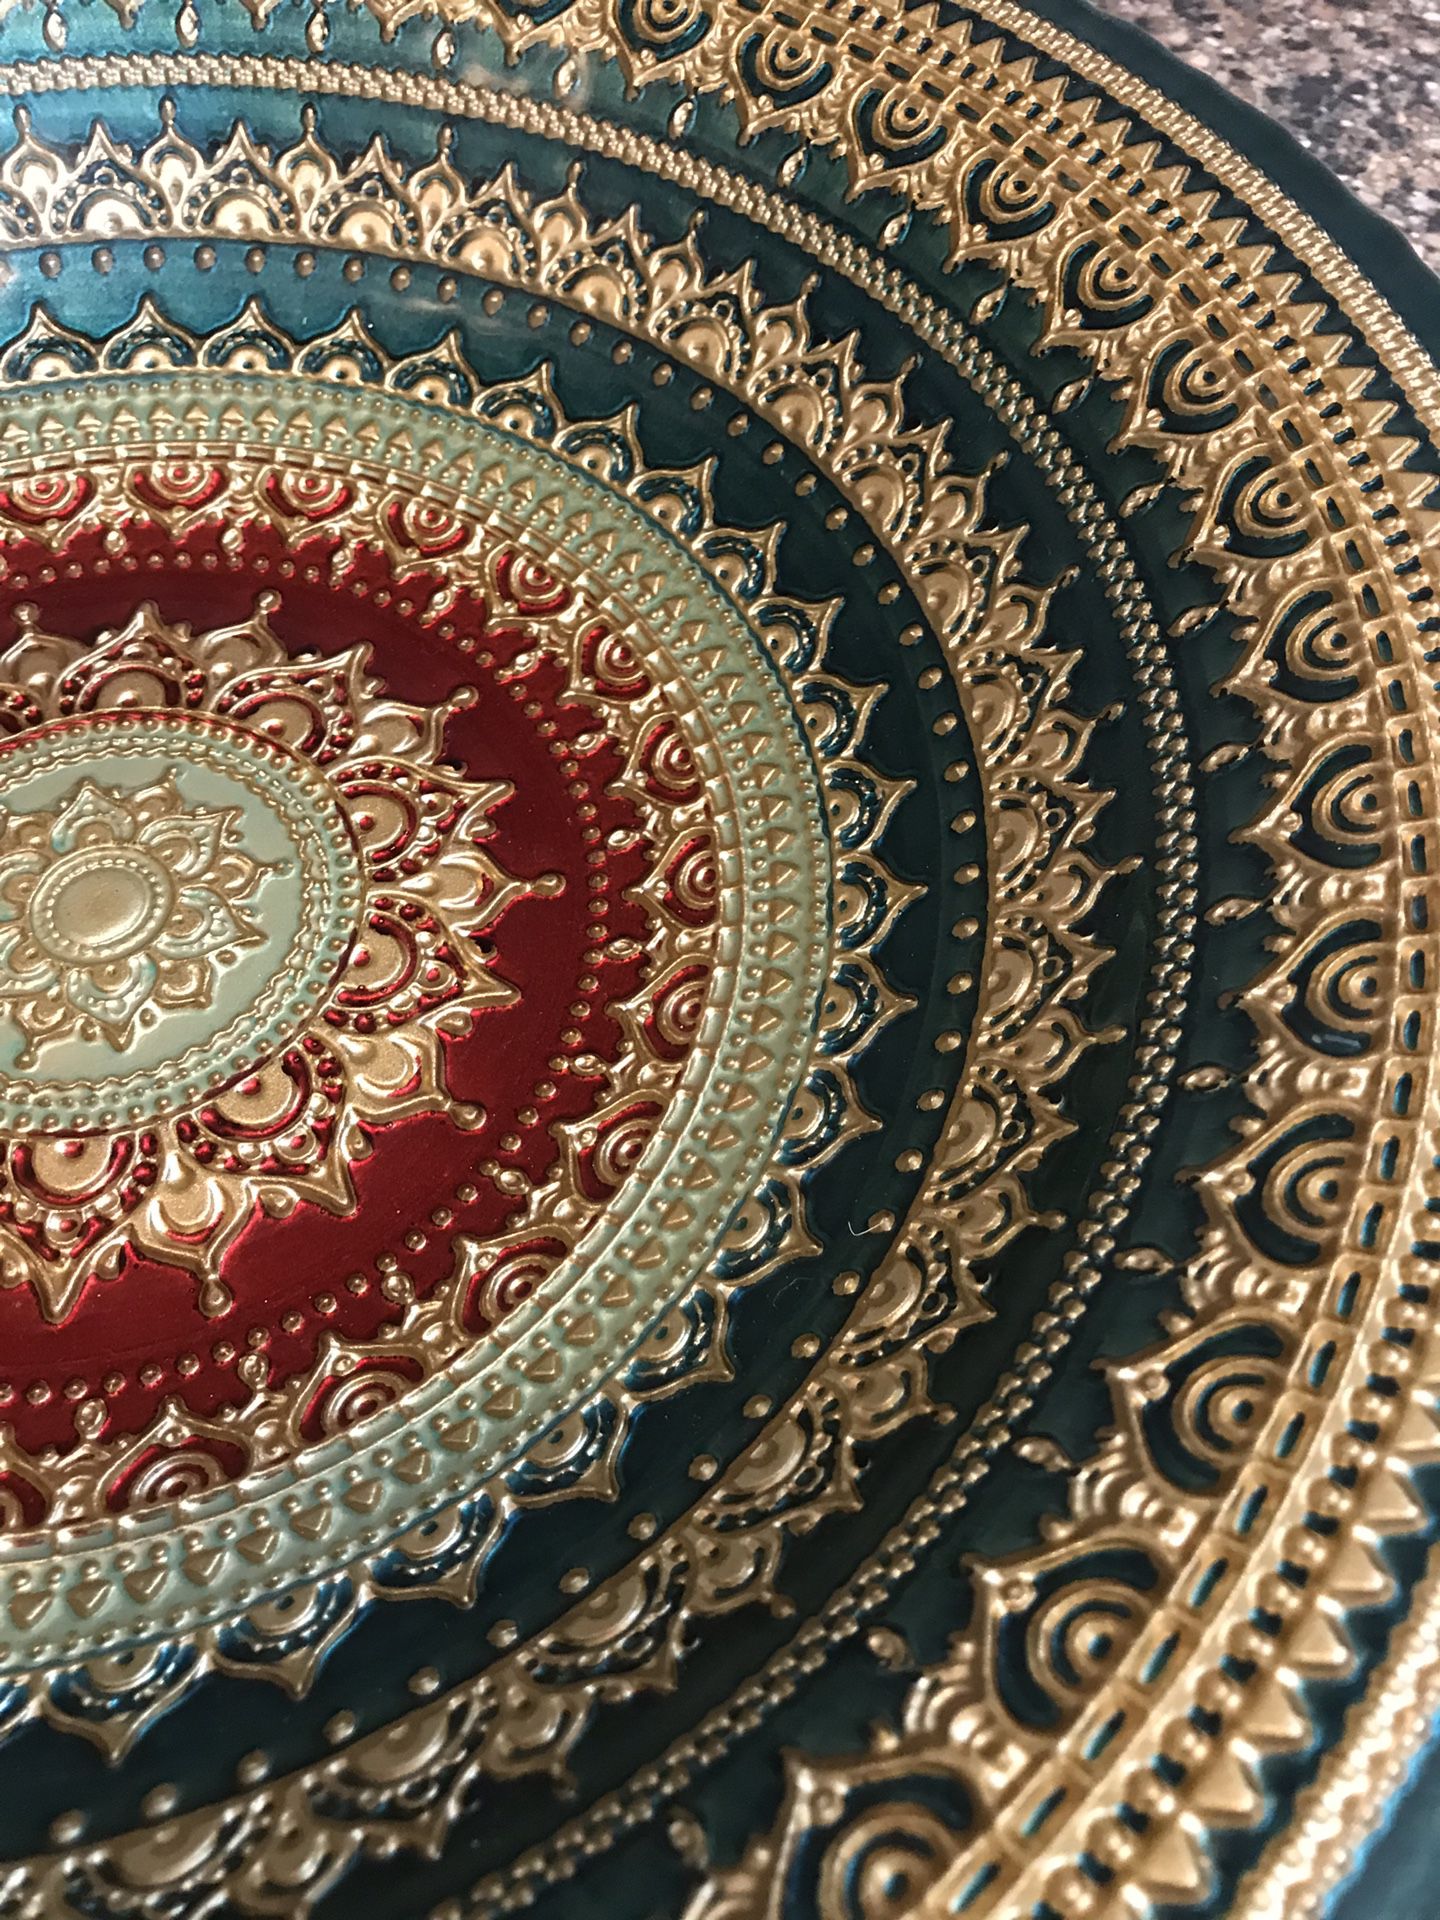 Beautiful decorative tray or a plate